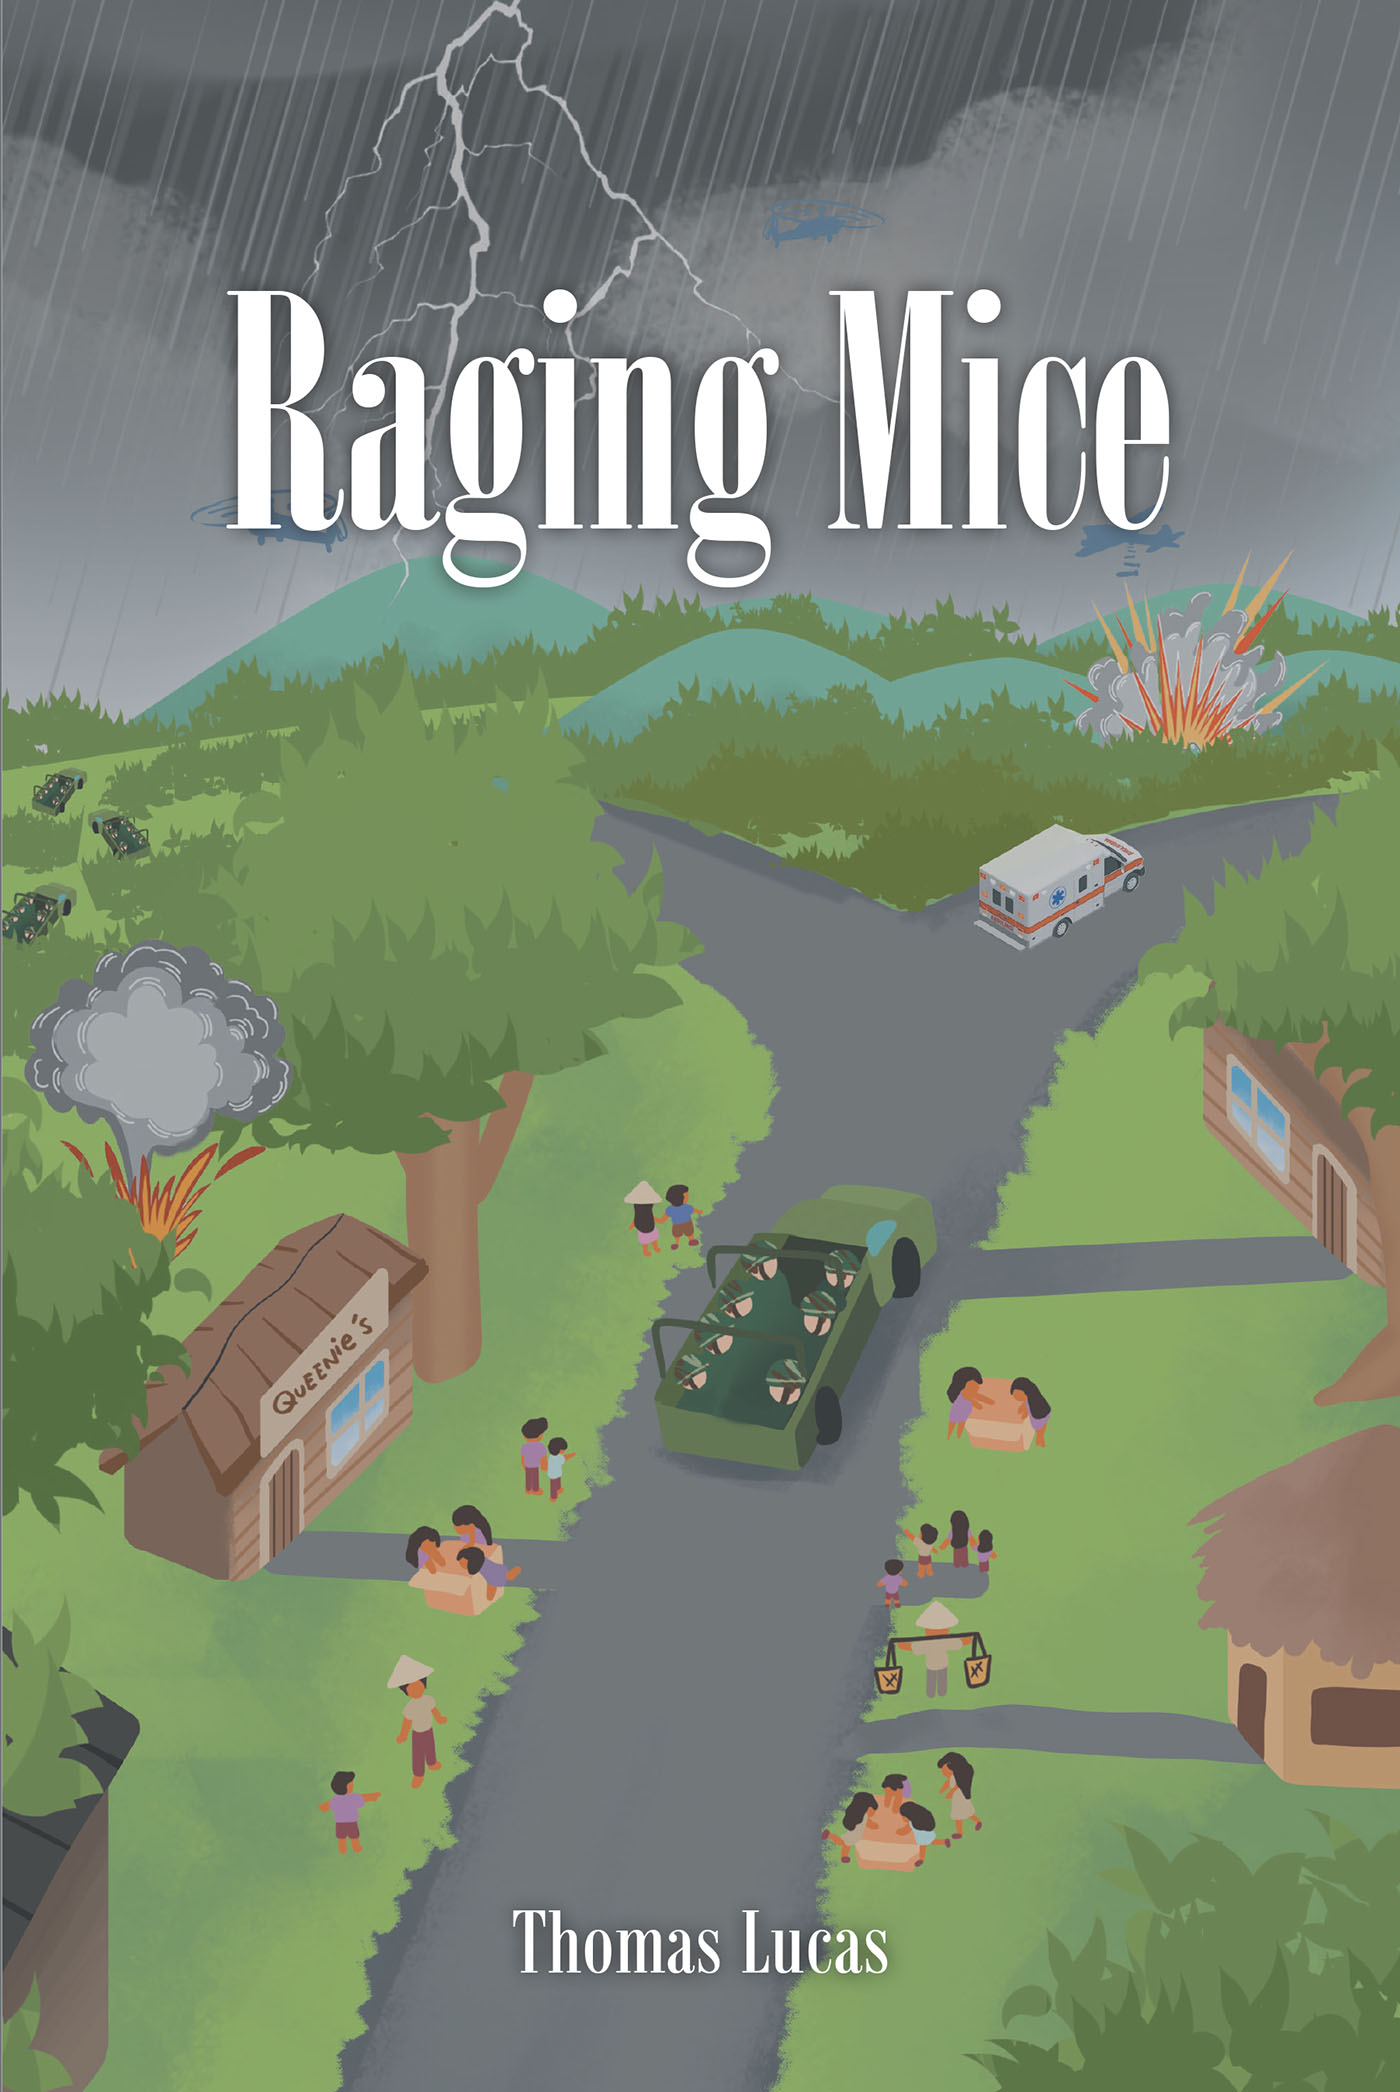 Thomas Lucas’s New Book, "Raging Mice," is a Compelling and Impactful Novel That Follows the Story of a Young Man Fighting During the Vietnam War